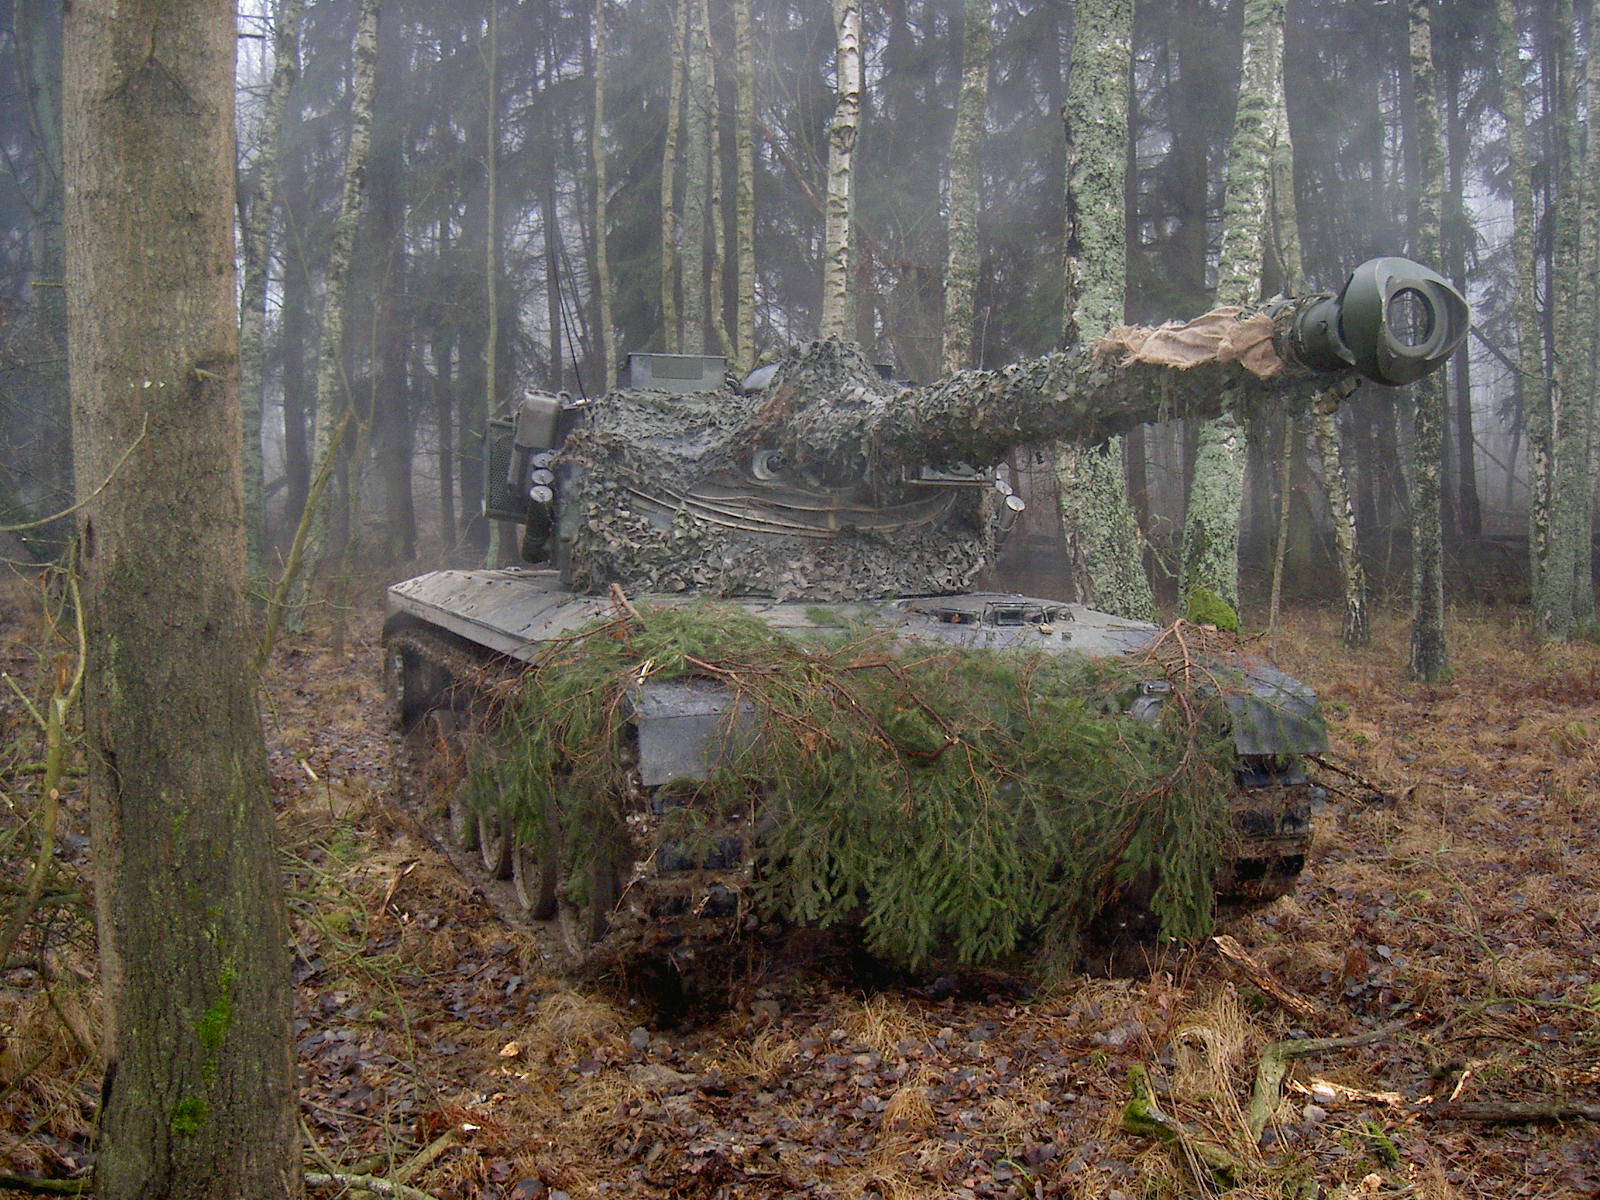 Military Tanks In The Woods Wallpaper